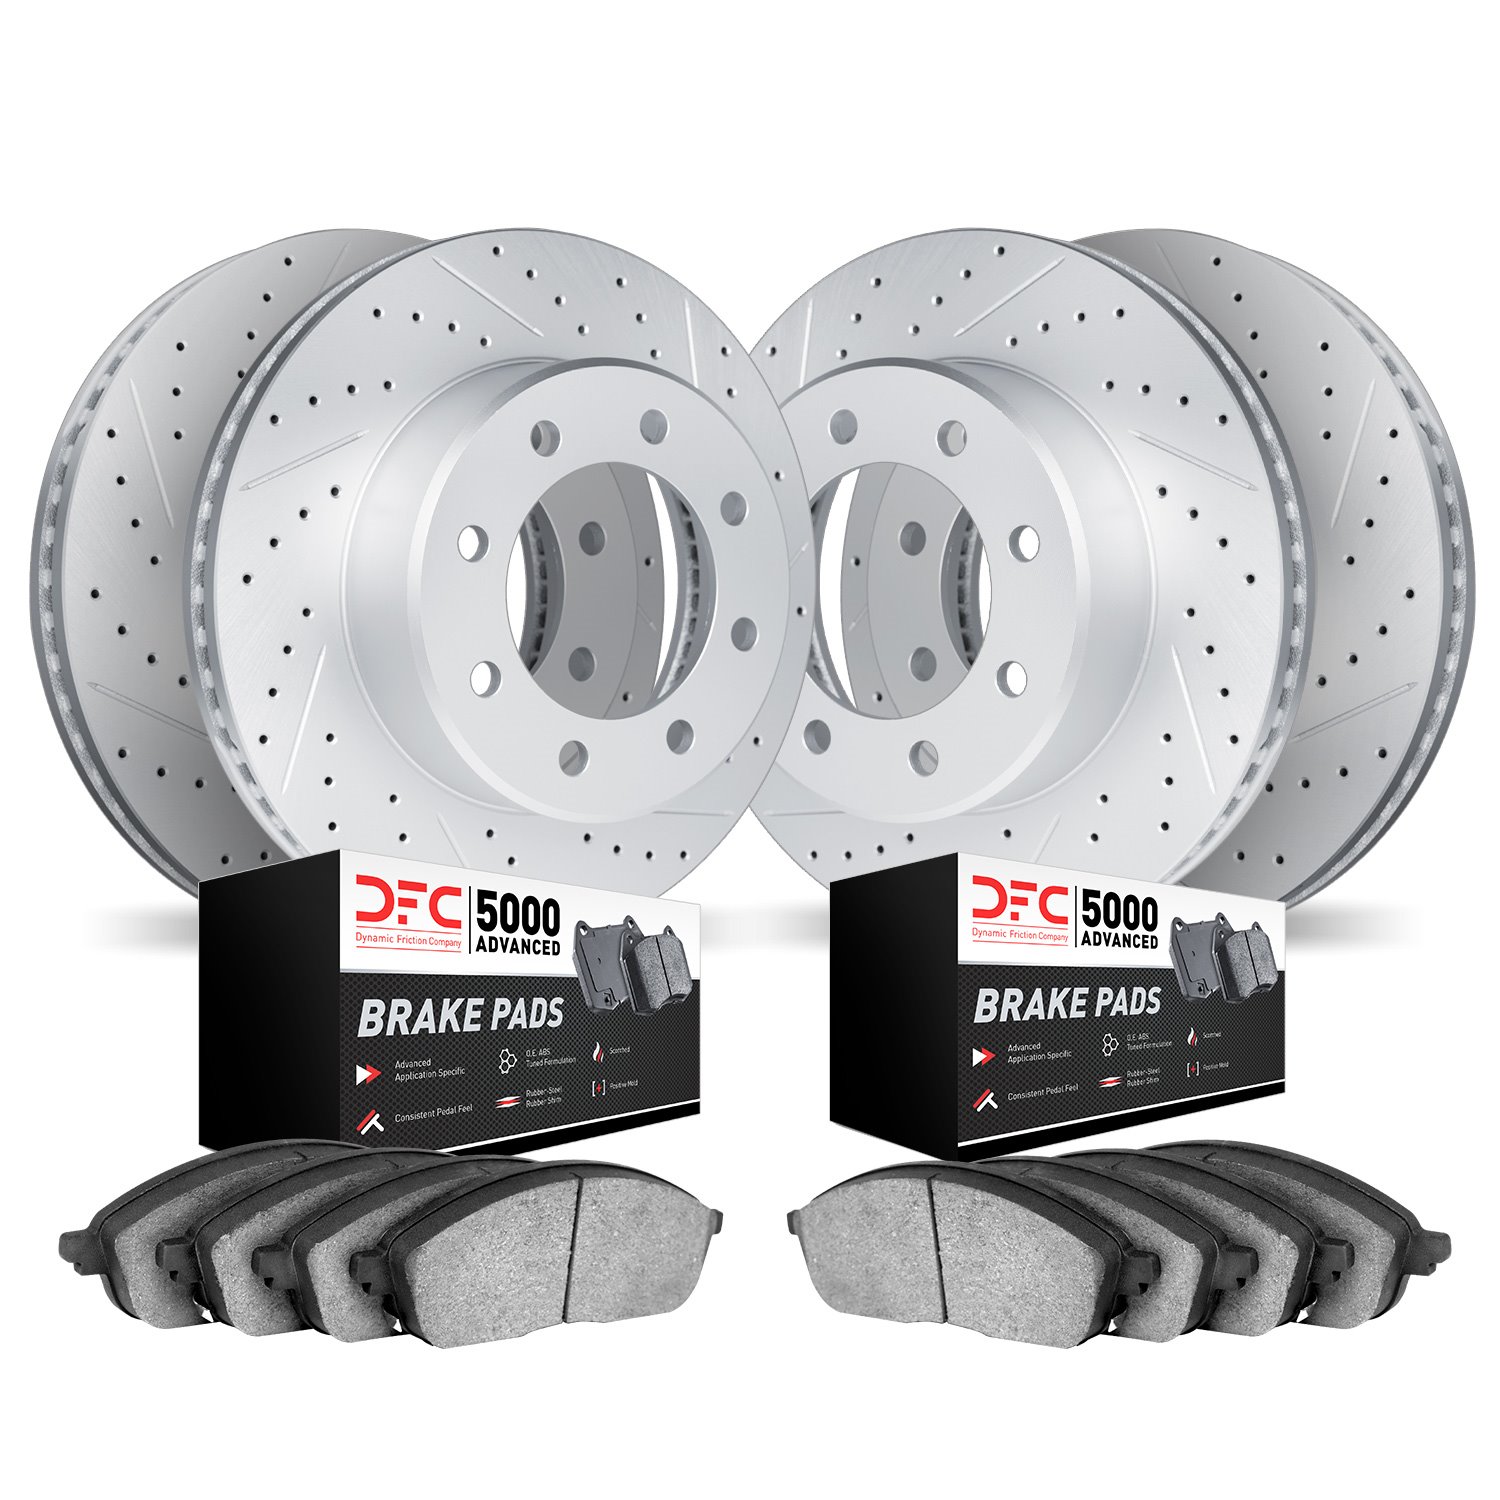 2504-54252 Geoperformance Drilled/Slotted Rotors w/5000 Advanced Brake Pads Kit, 1999-2005 Ford/Lincoln/Mercury/Mazda, Position: